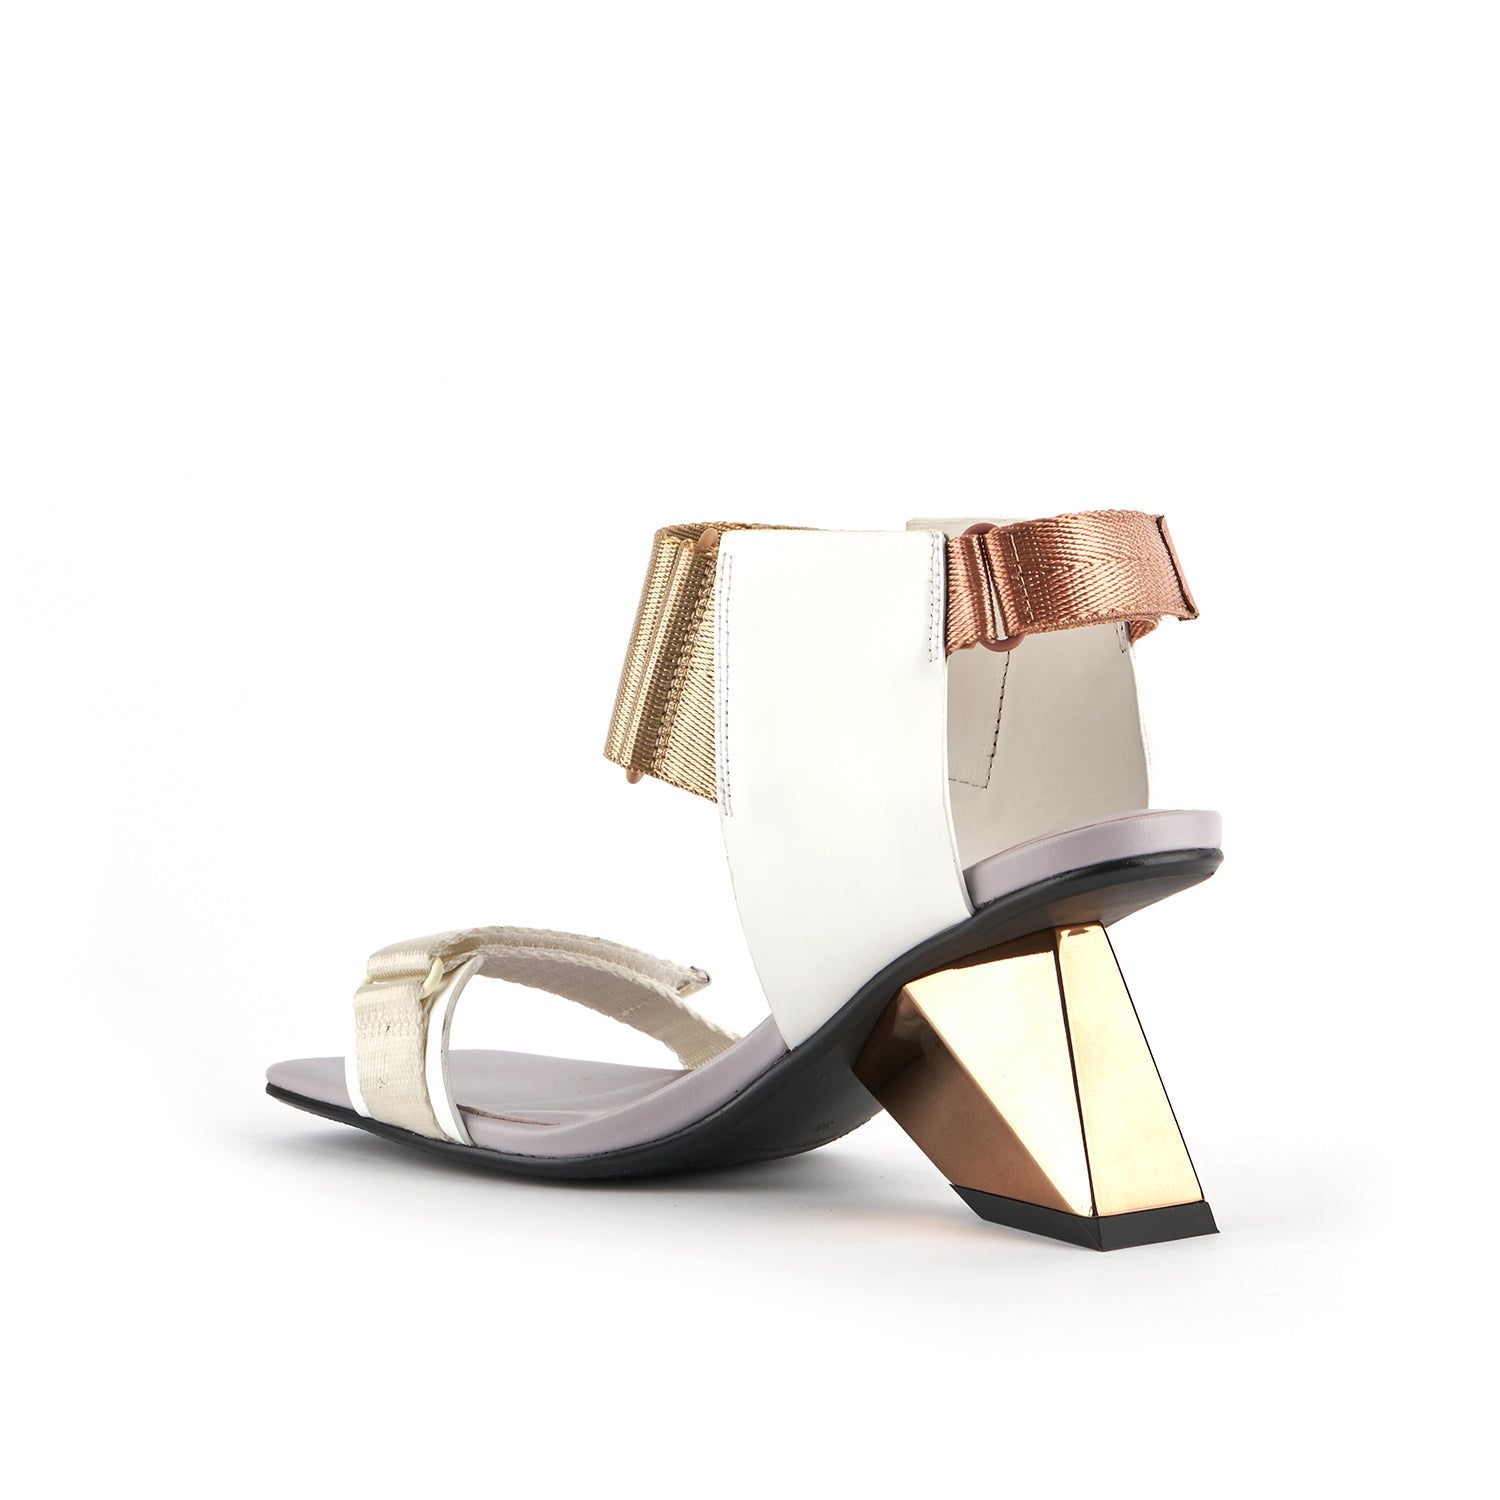 inner back side view of the united nude rockit run high heel sandal in the color bohemian.